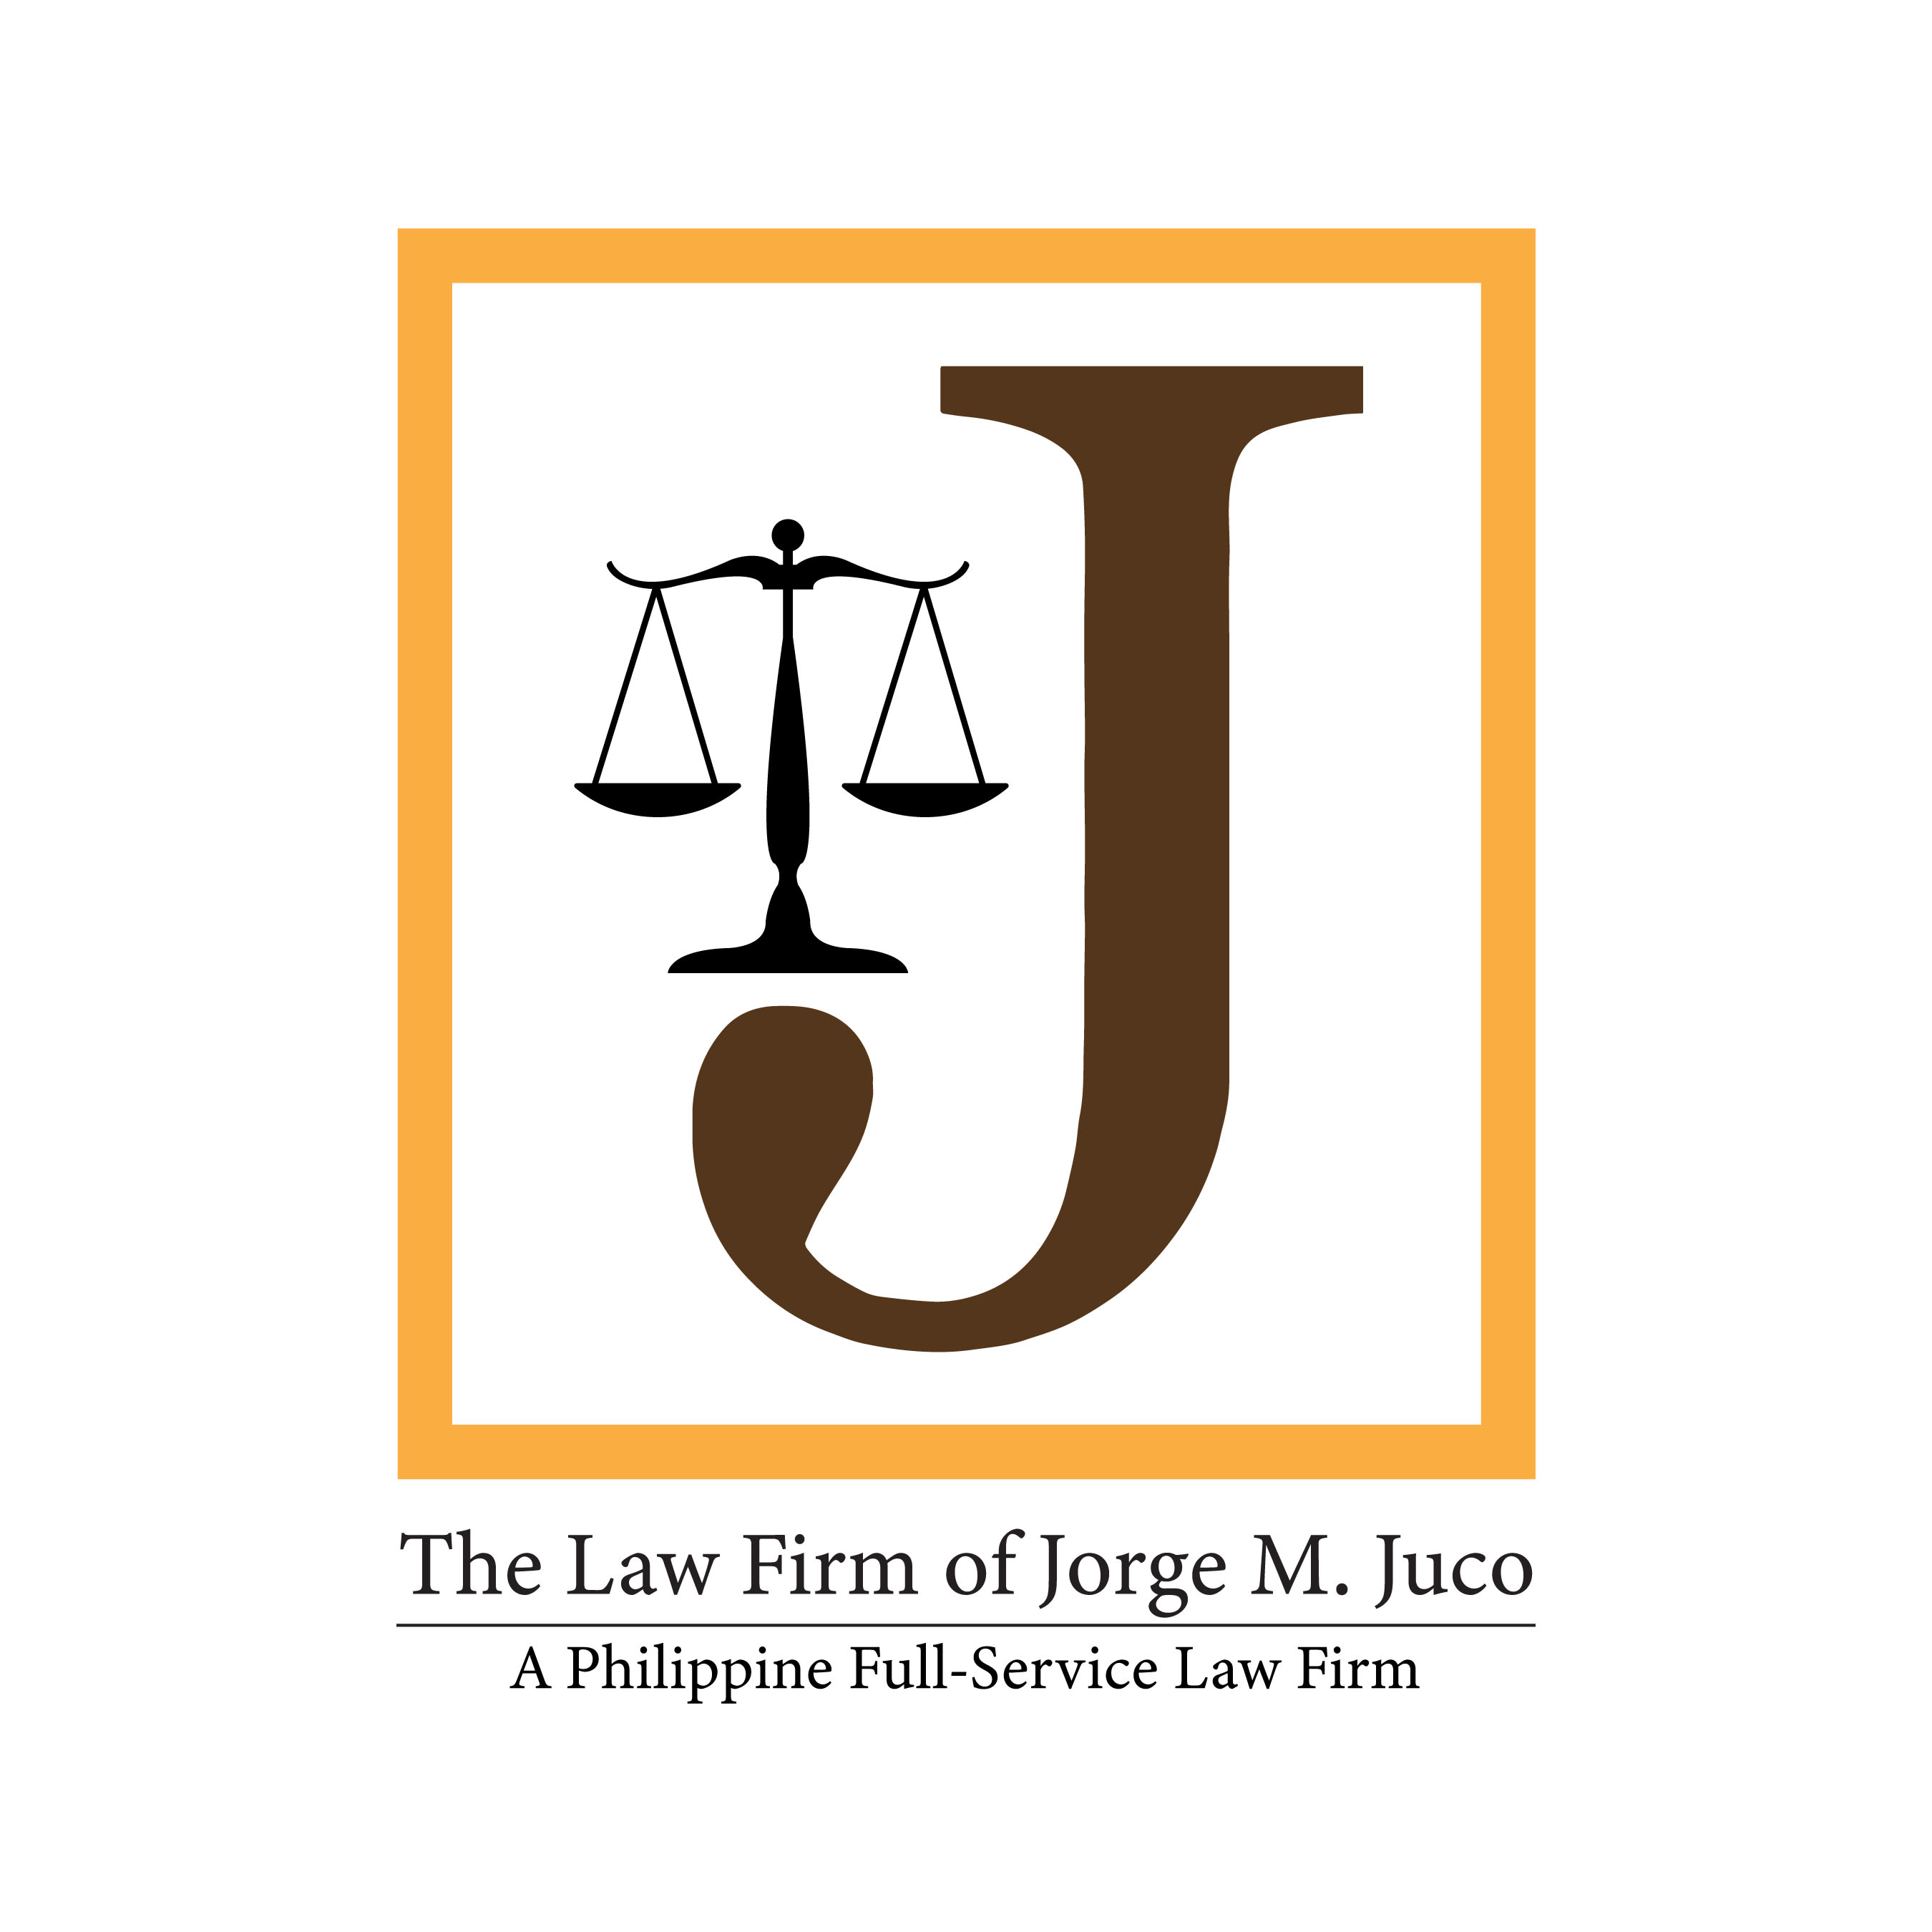 The Law Firm of Jorge M. Juco